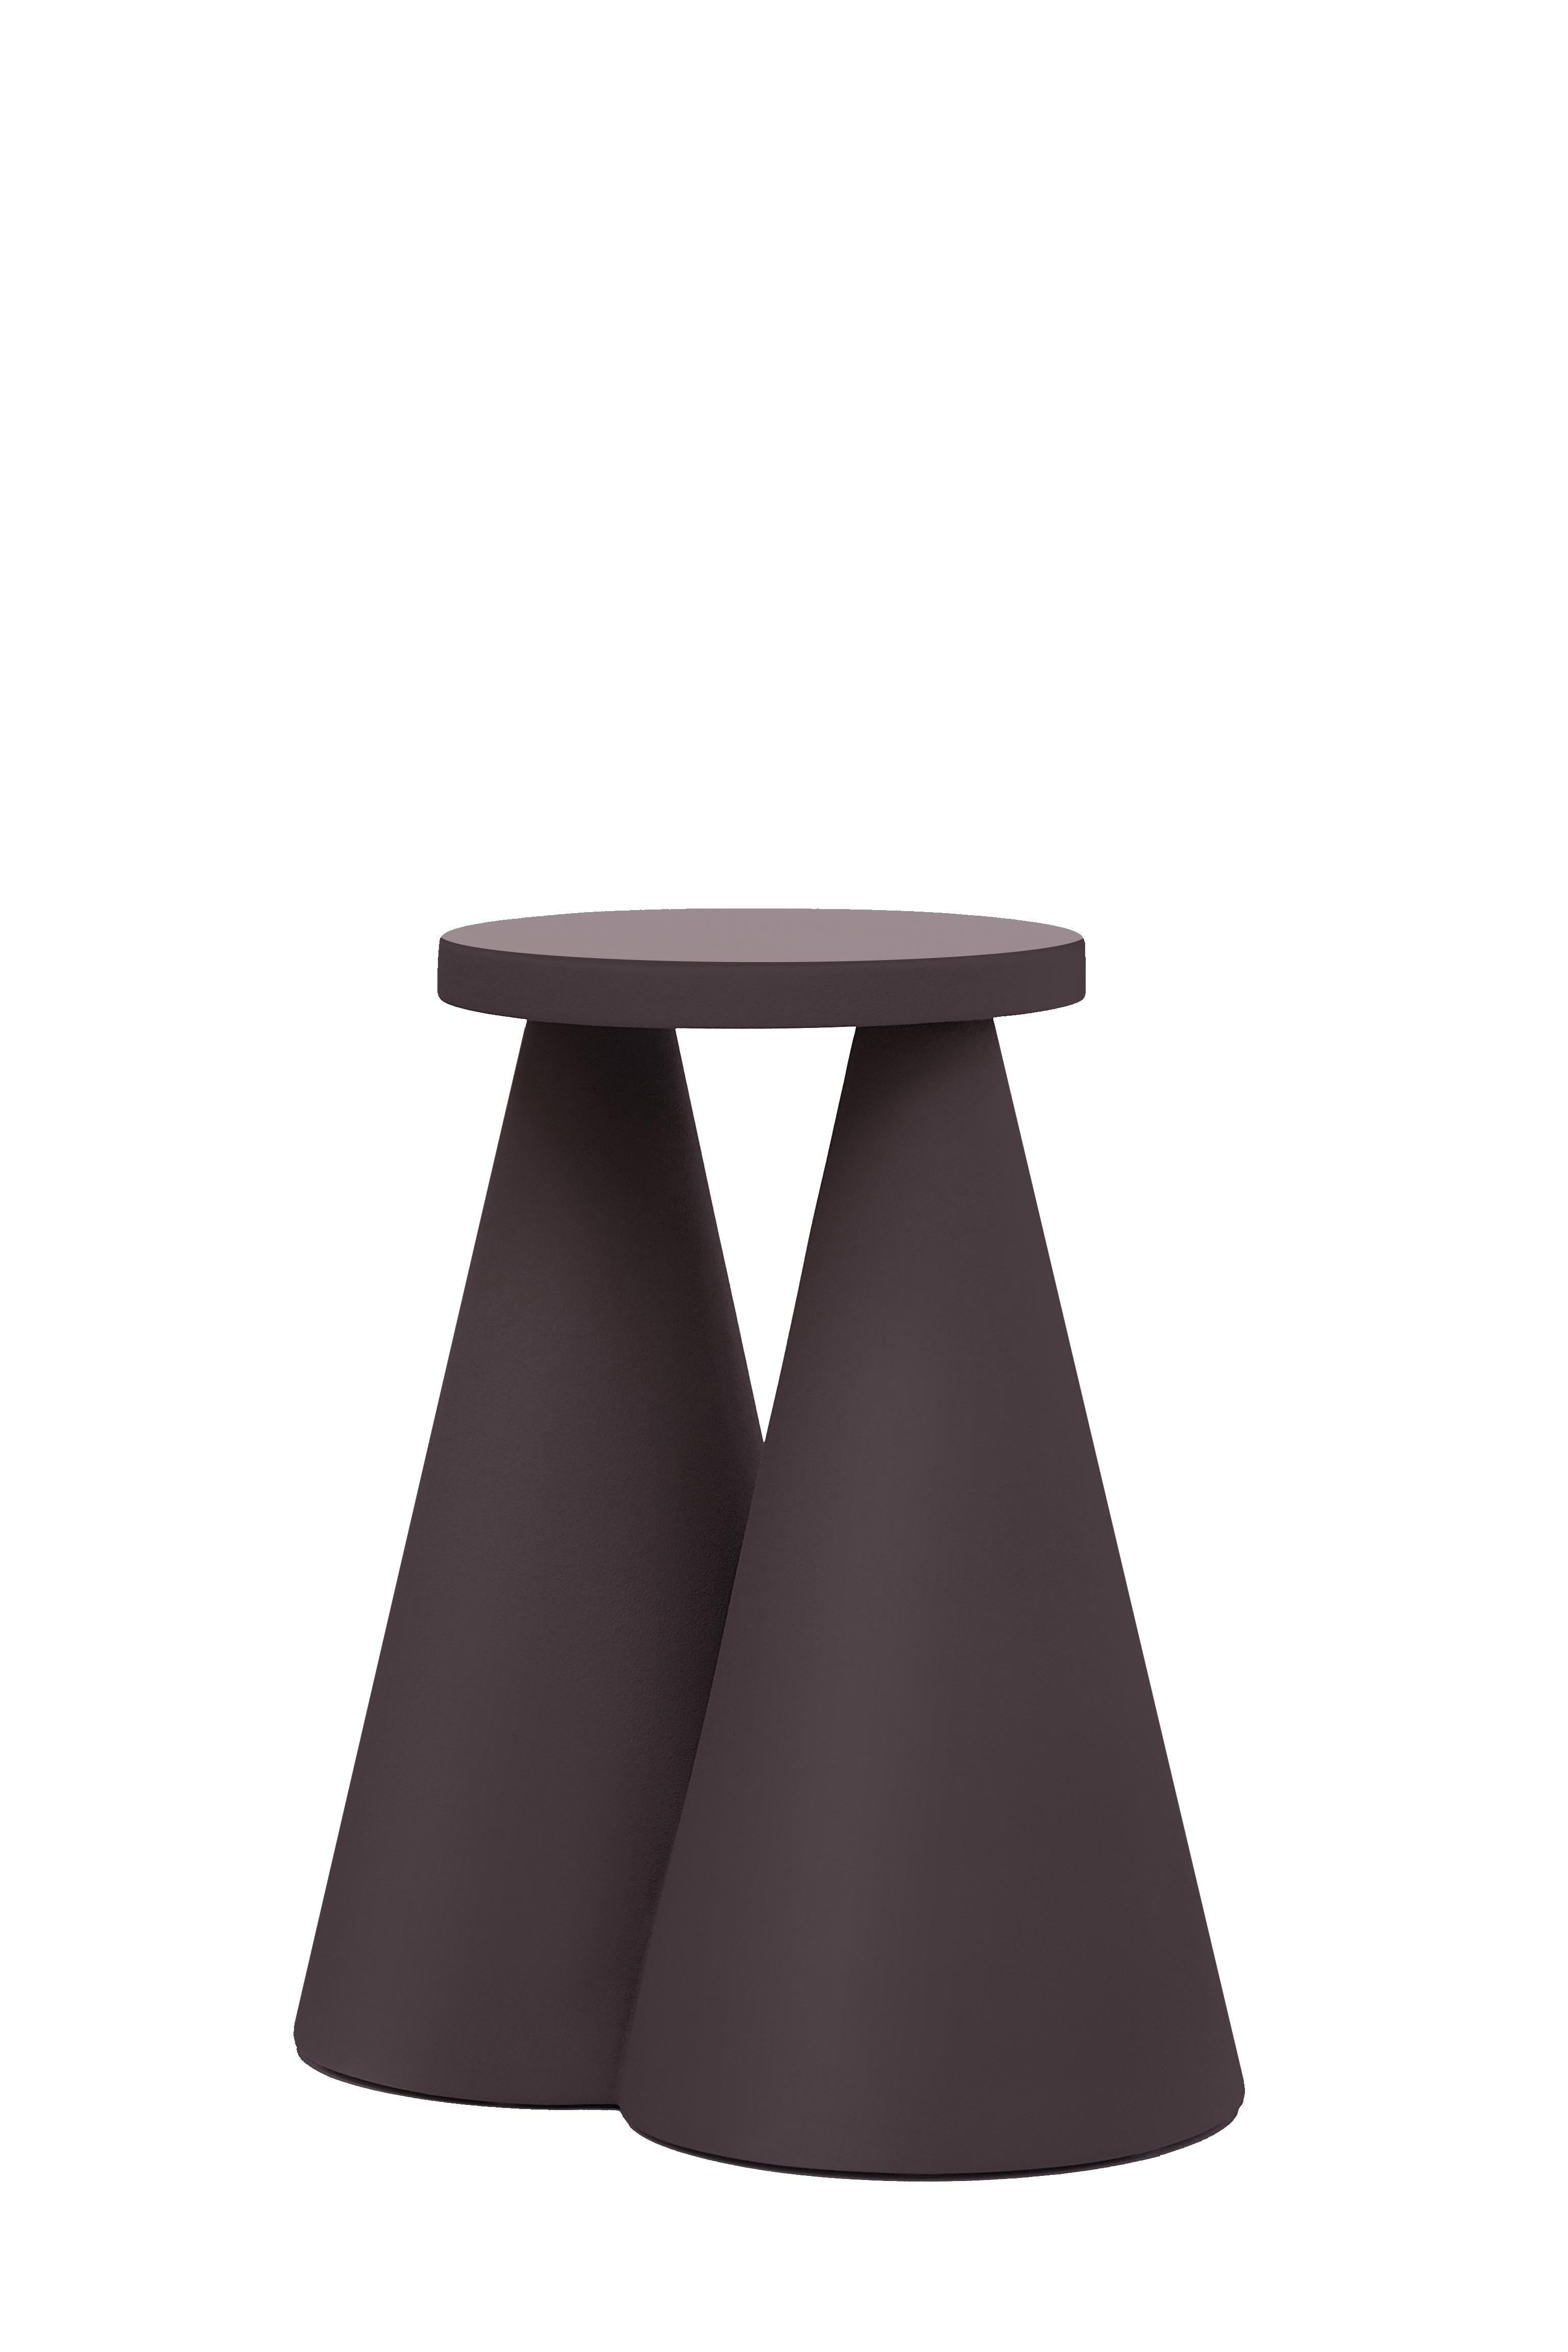 Pair of Isola Side Table by Cara Davide For Sale 1